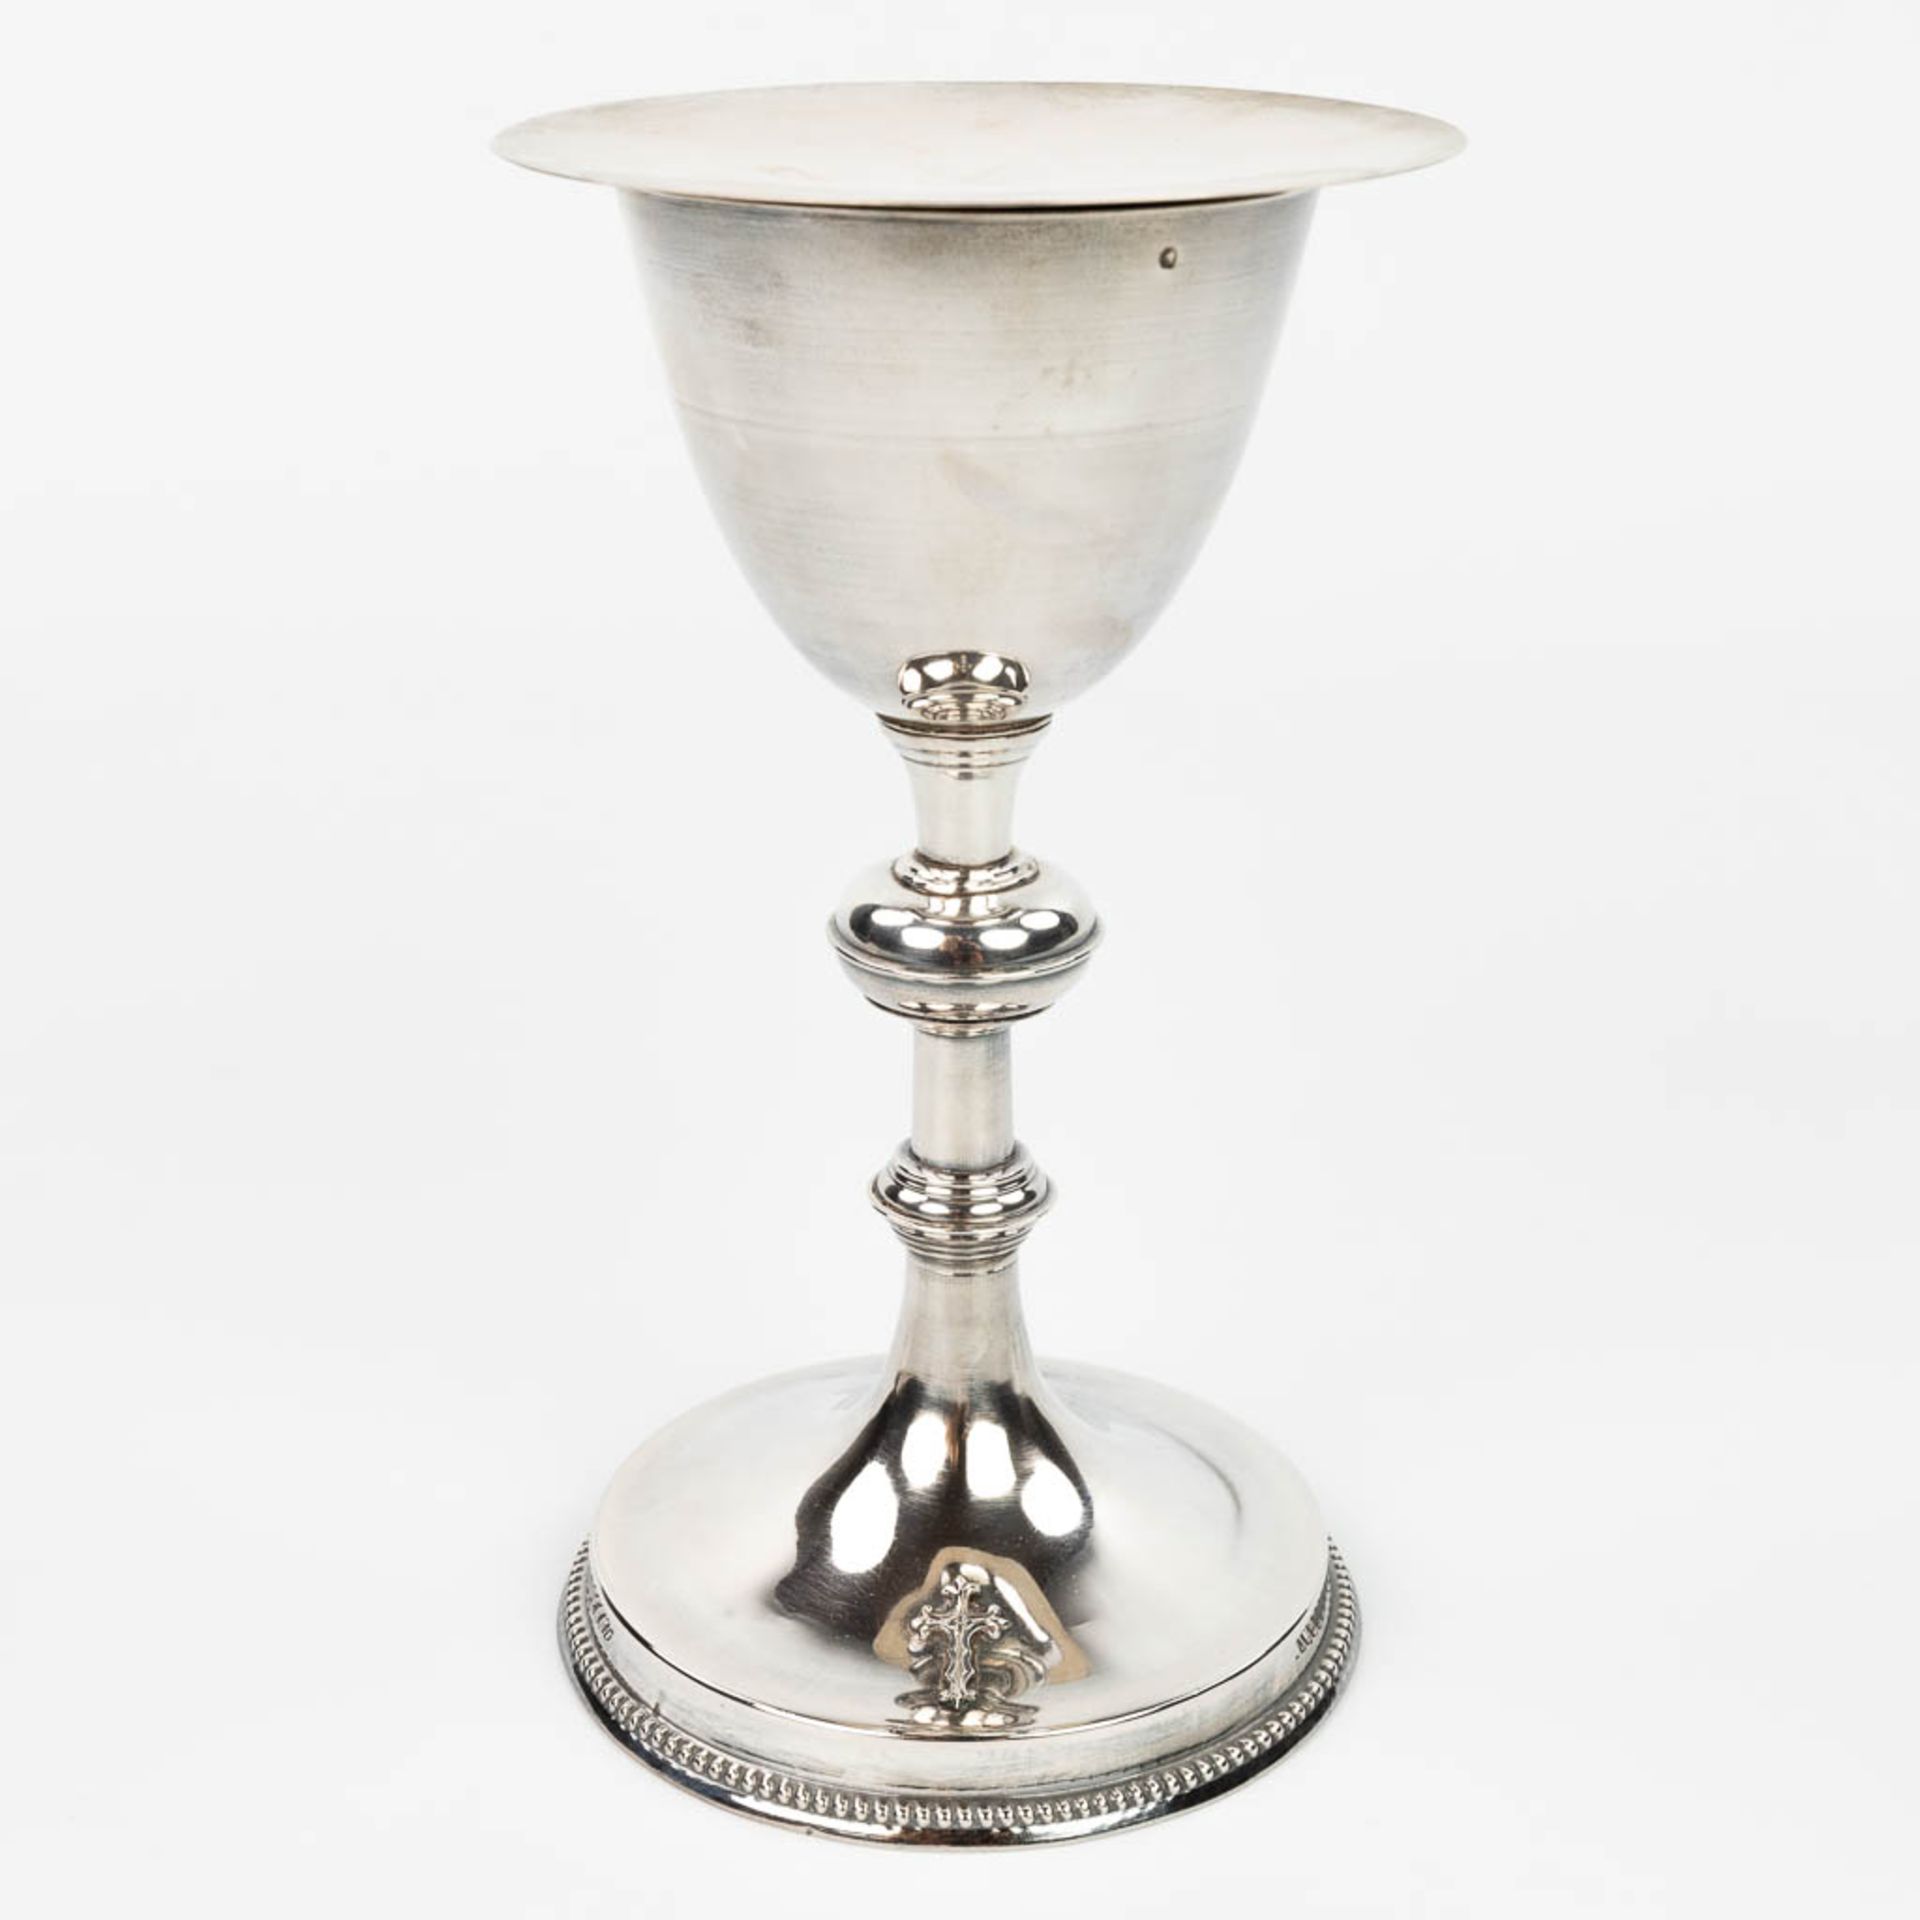 A French gothic revival silver chalice, with a paten and spoon. (H:21cm)